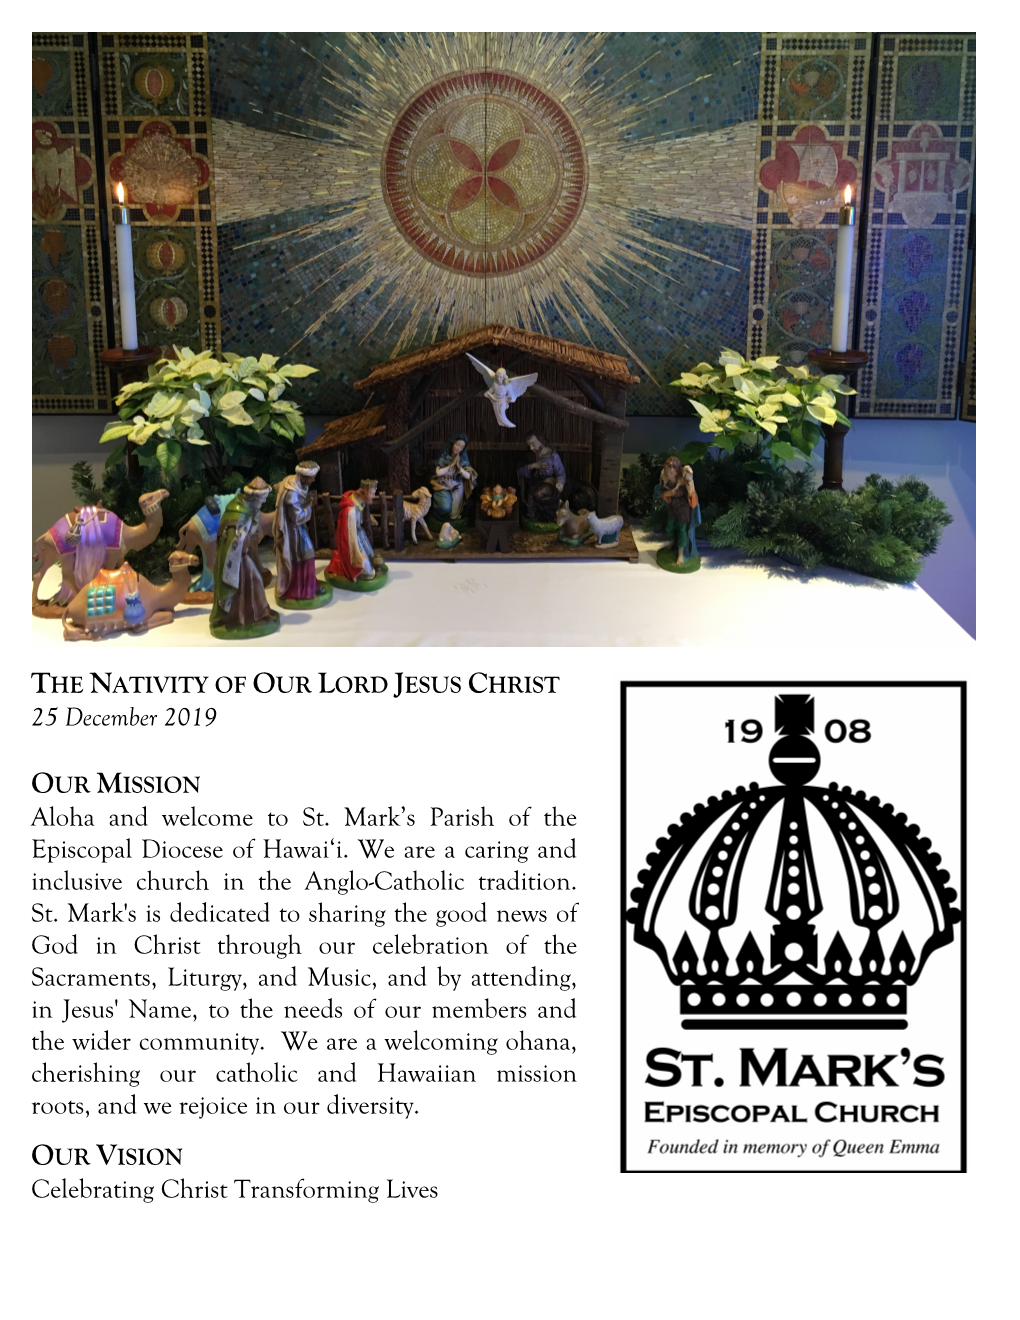 25 December 2019 Aloha and Welcome to St. Mark's Parish of The